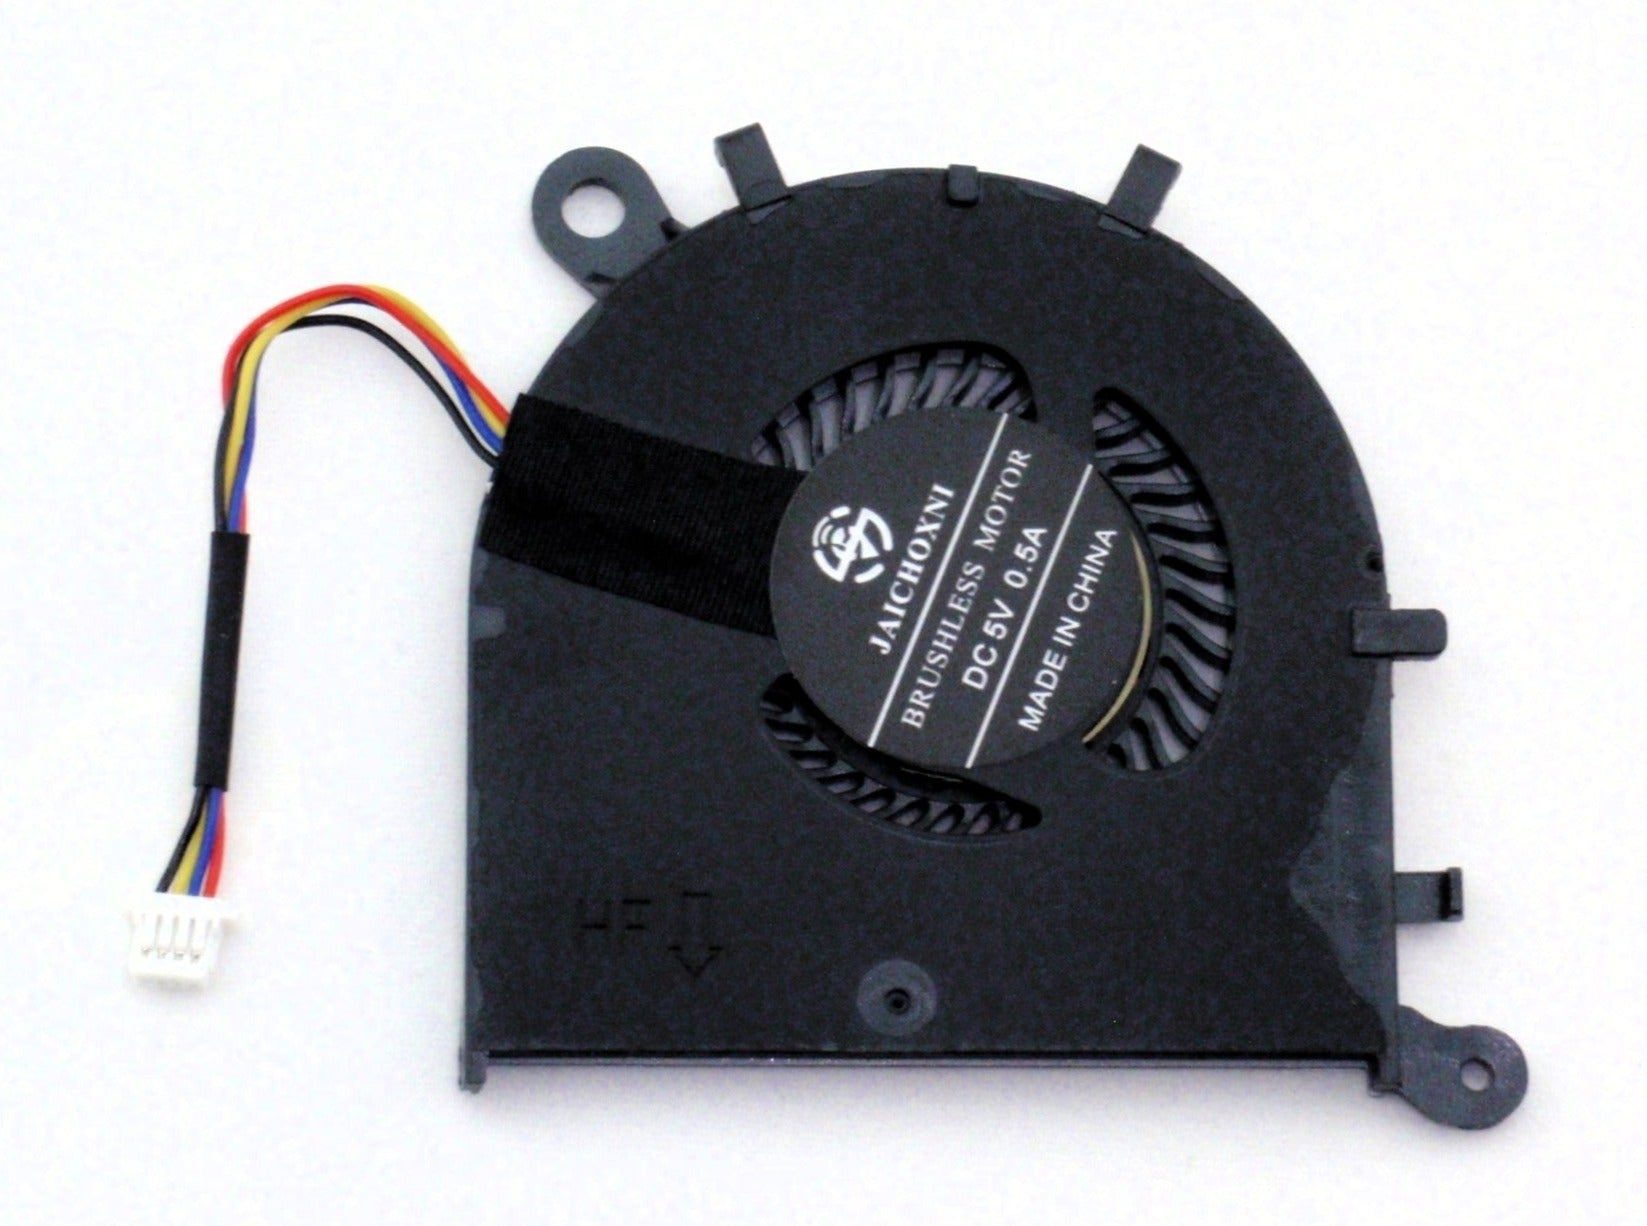 Dell New CPU Cooling Fan 0XHT5V DC58000F2F0 DFS150505000T-FFH0 Inspiron XPS 13 9343 9350 9360 XHT5V